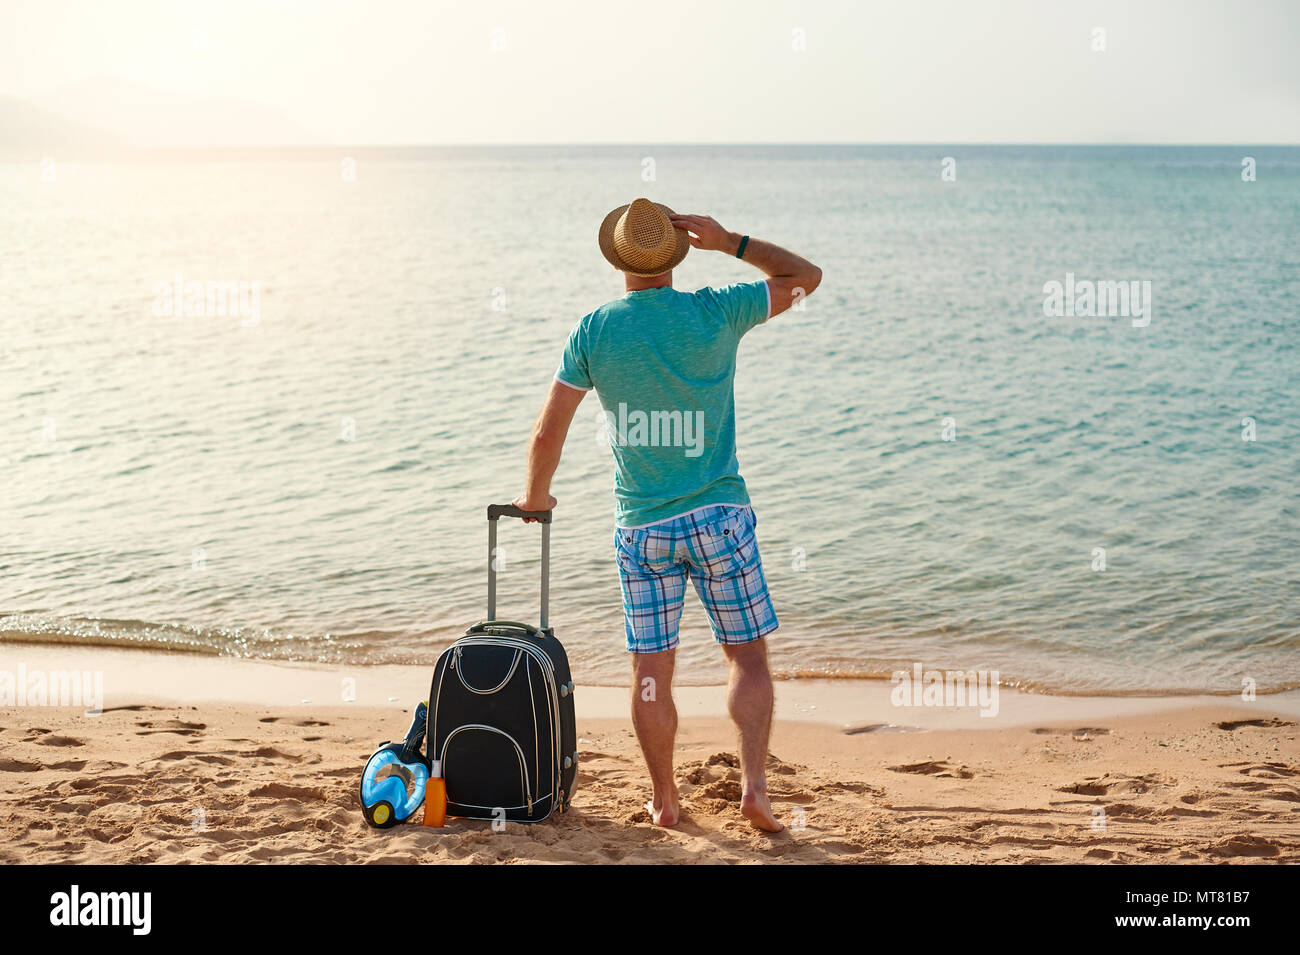 Man tourist in summer clothes with a suitcase in his hand, looking at the sea on the beach, concept of time to travel Stock Photo